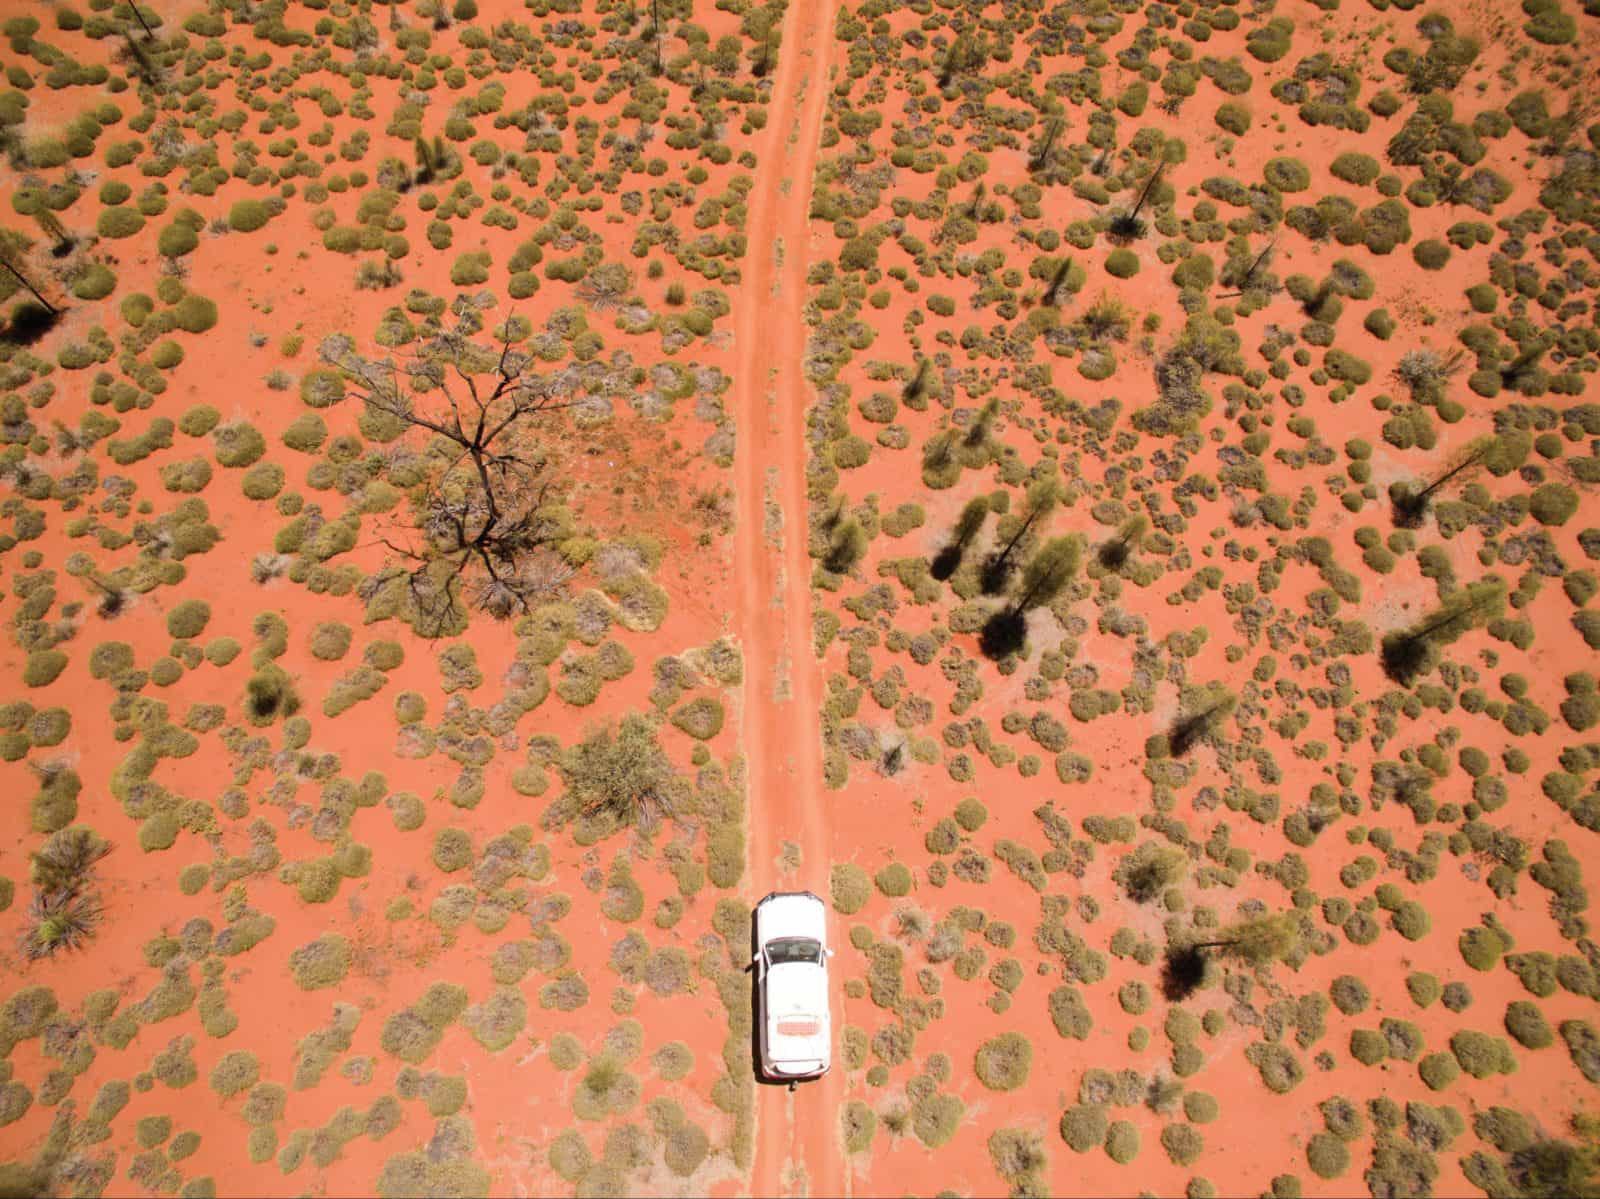 Vehicle surroudned by spinifex bushes